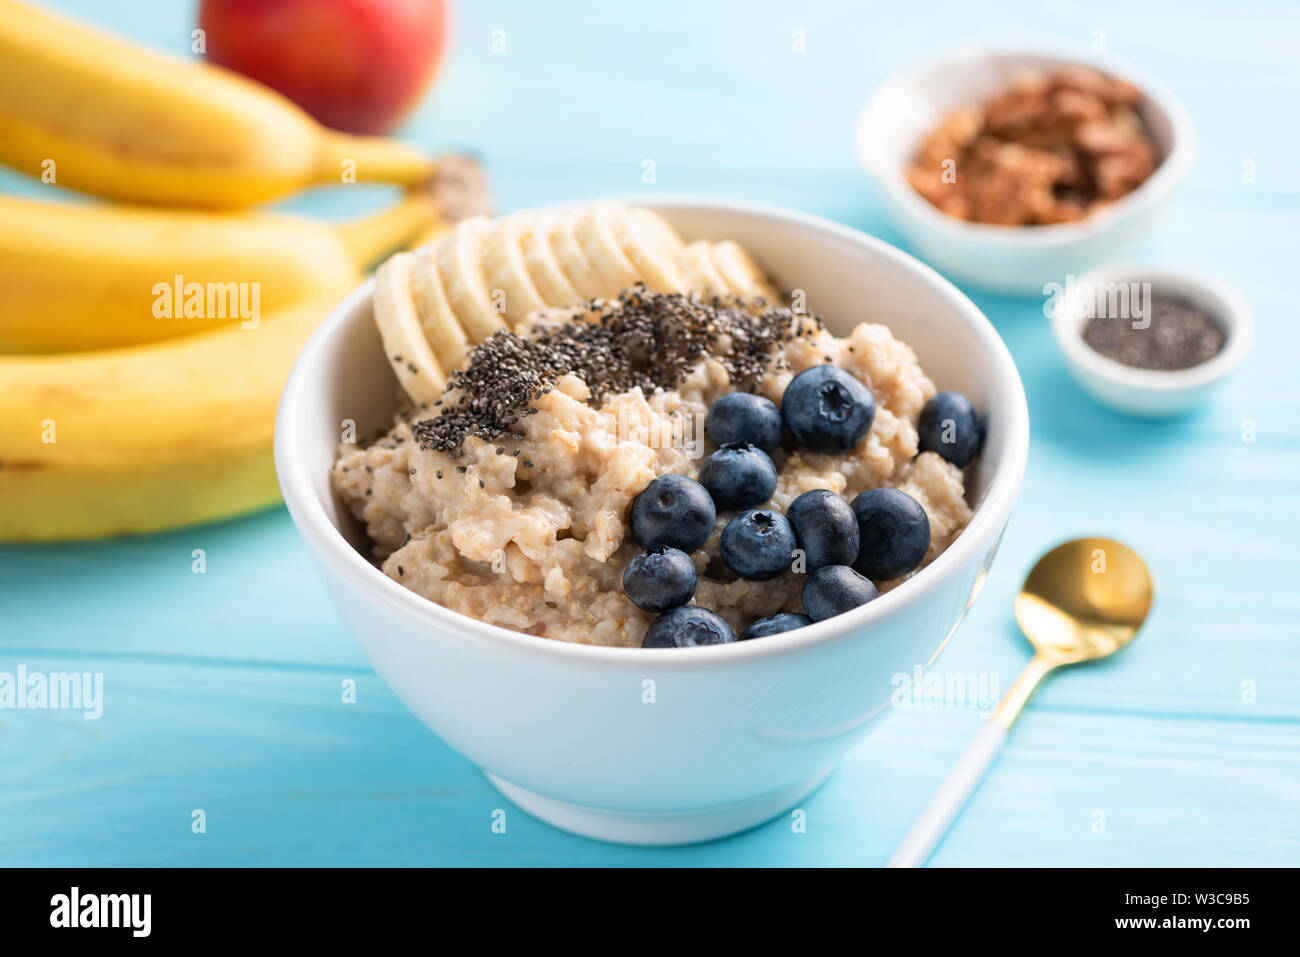 Oatmeal porridge with banana, blueberries and chia seeds in white bowl on blue background. Healthy breakfast food Stock Photo